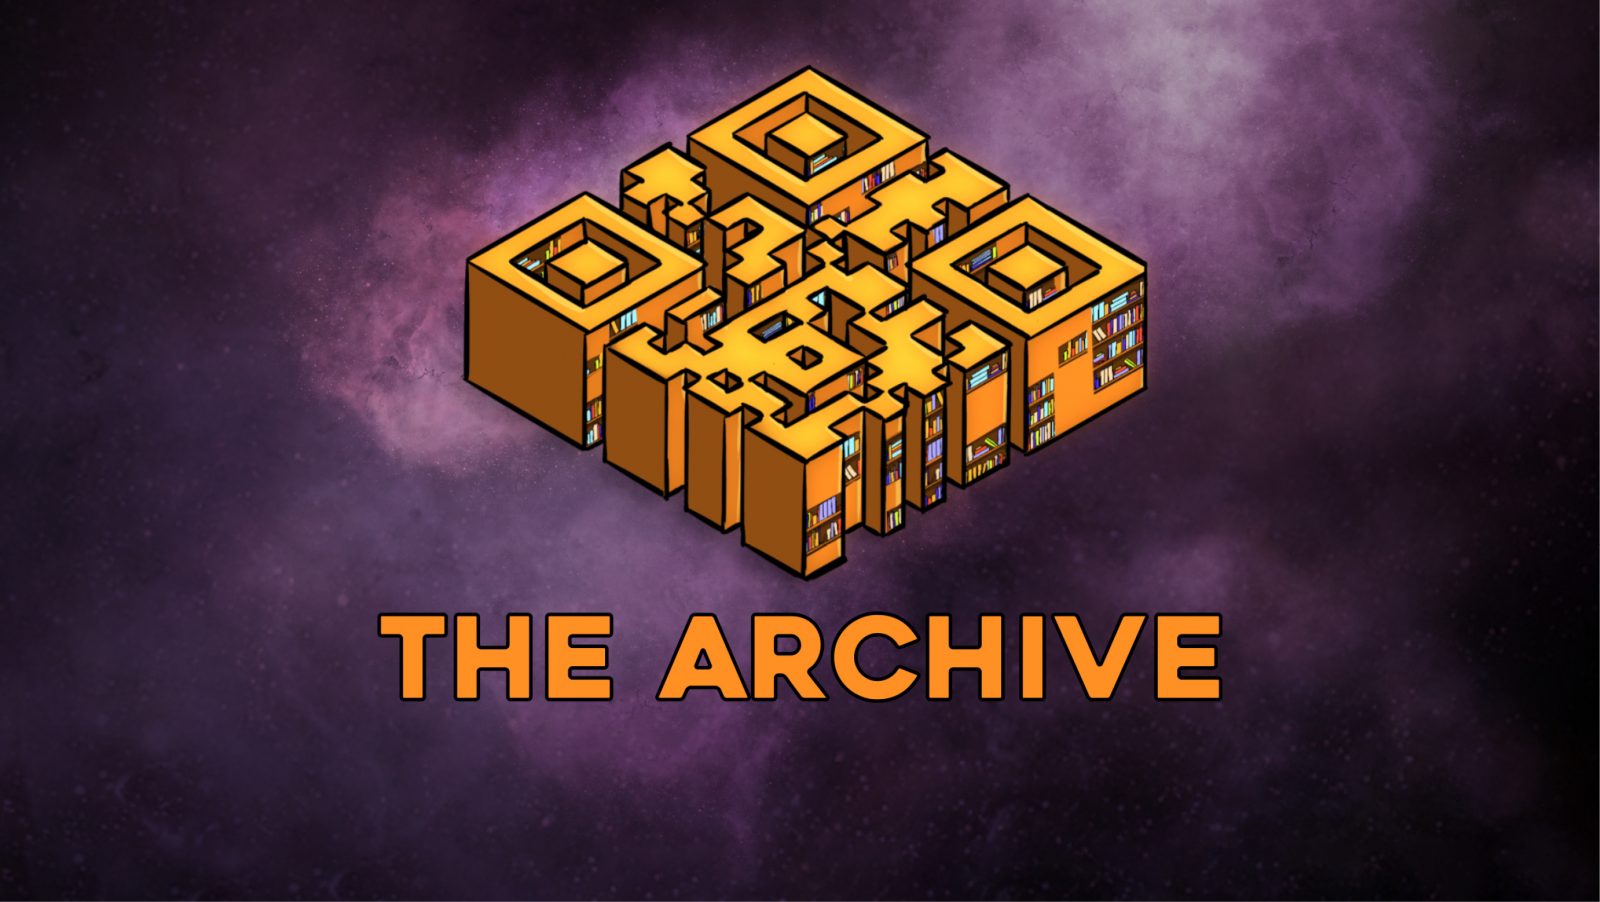 The ArcHive